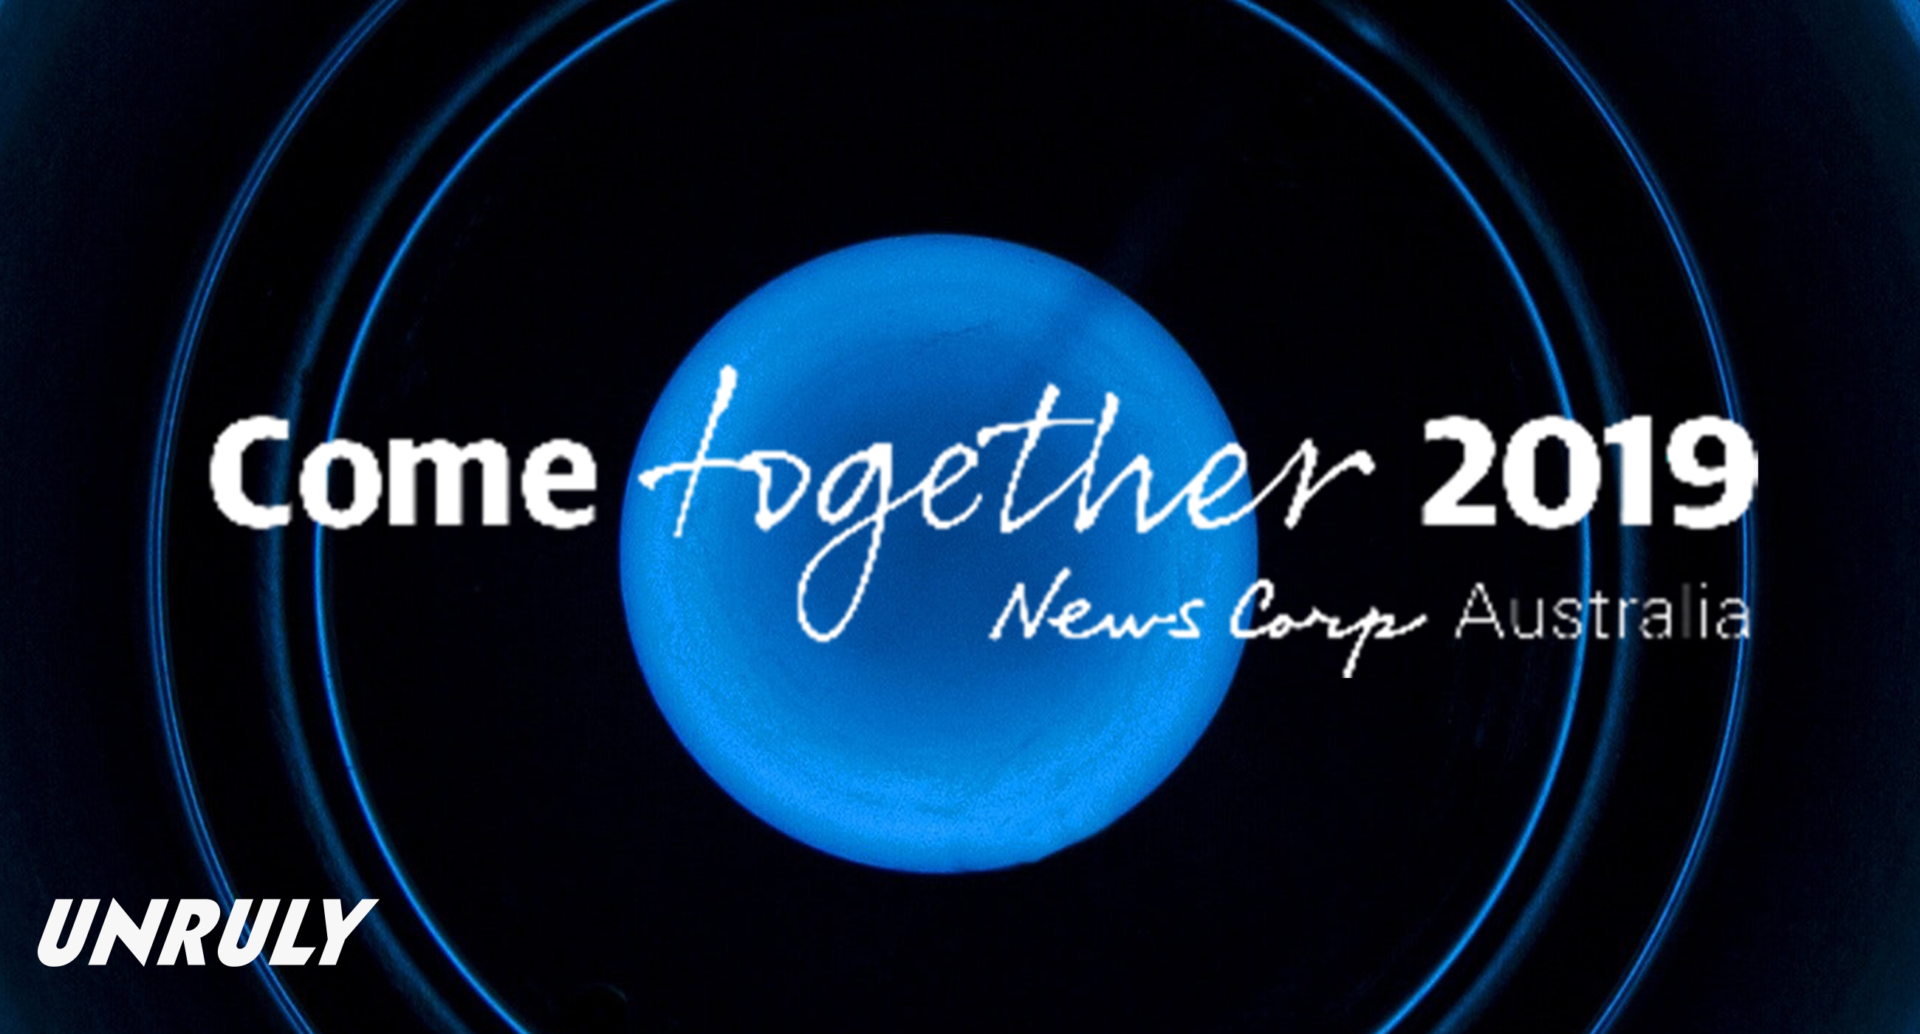 News Corp Australia’s Come Together 2019 invites clients to join the journey